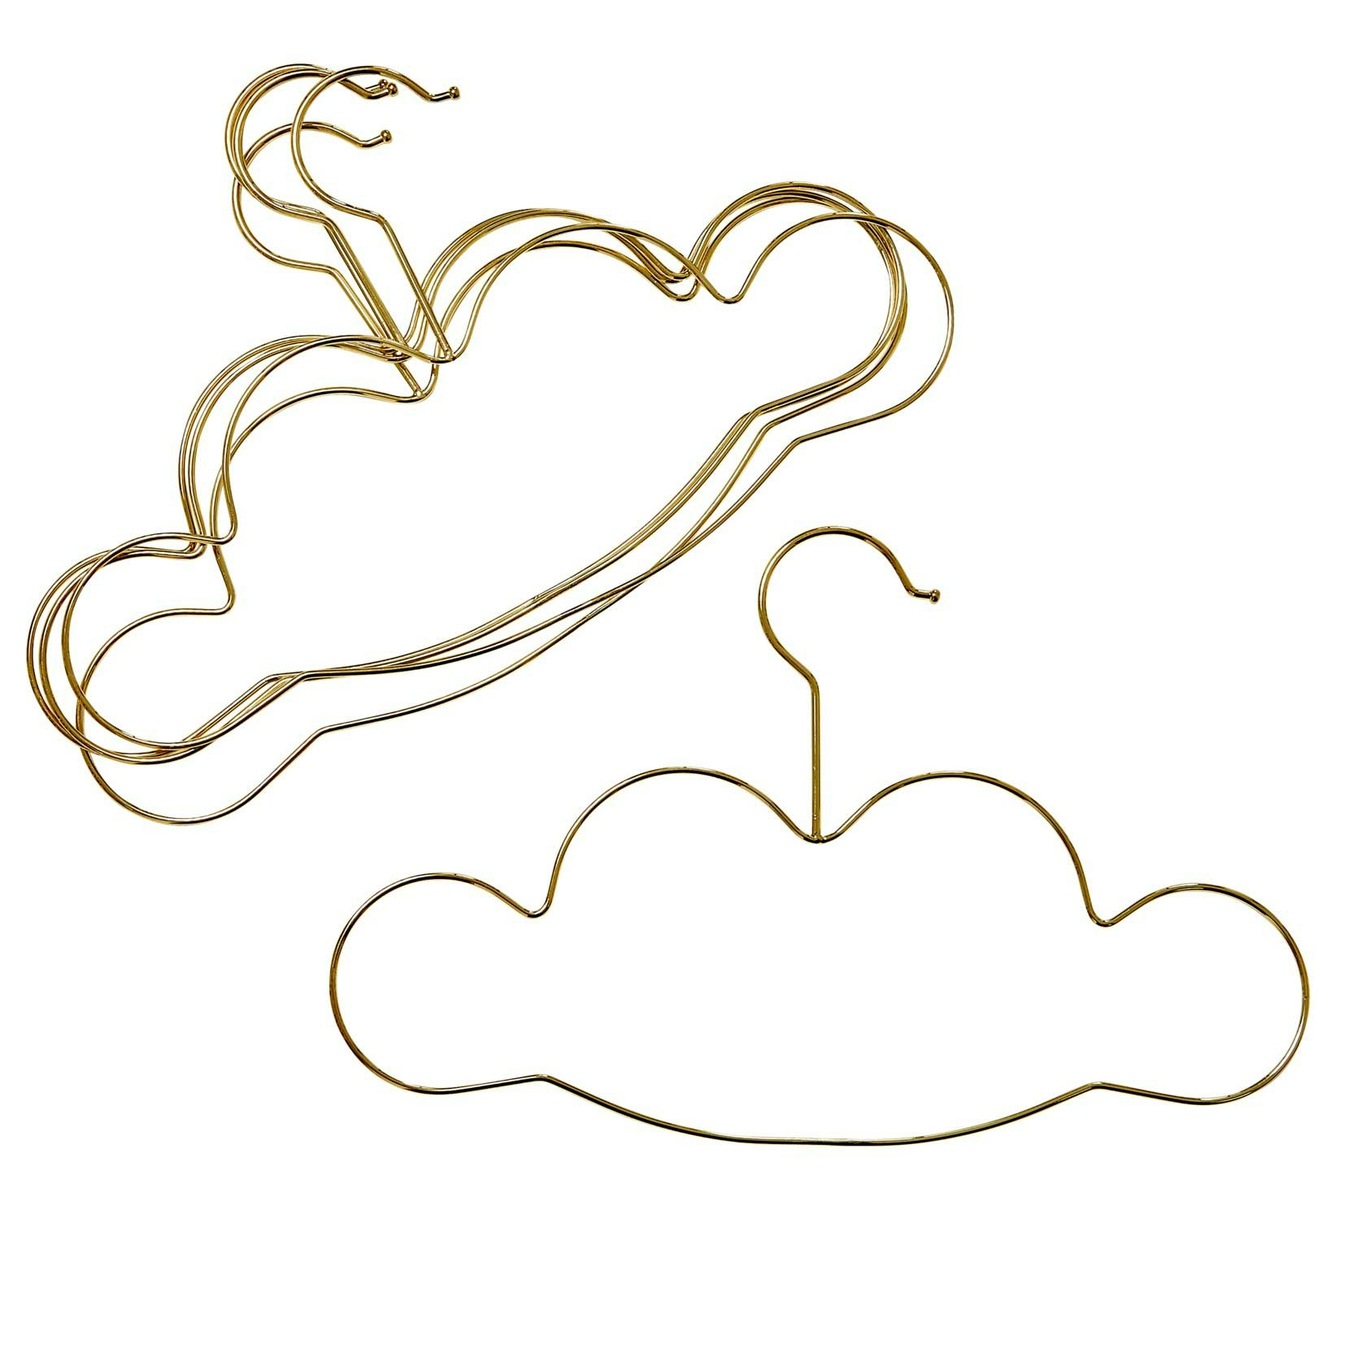 https://royaldesign.com/image/2/rice-cloud-hangers-for-kids-5-pack-gold-0?w=800&quality=80